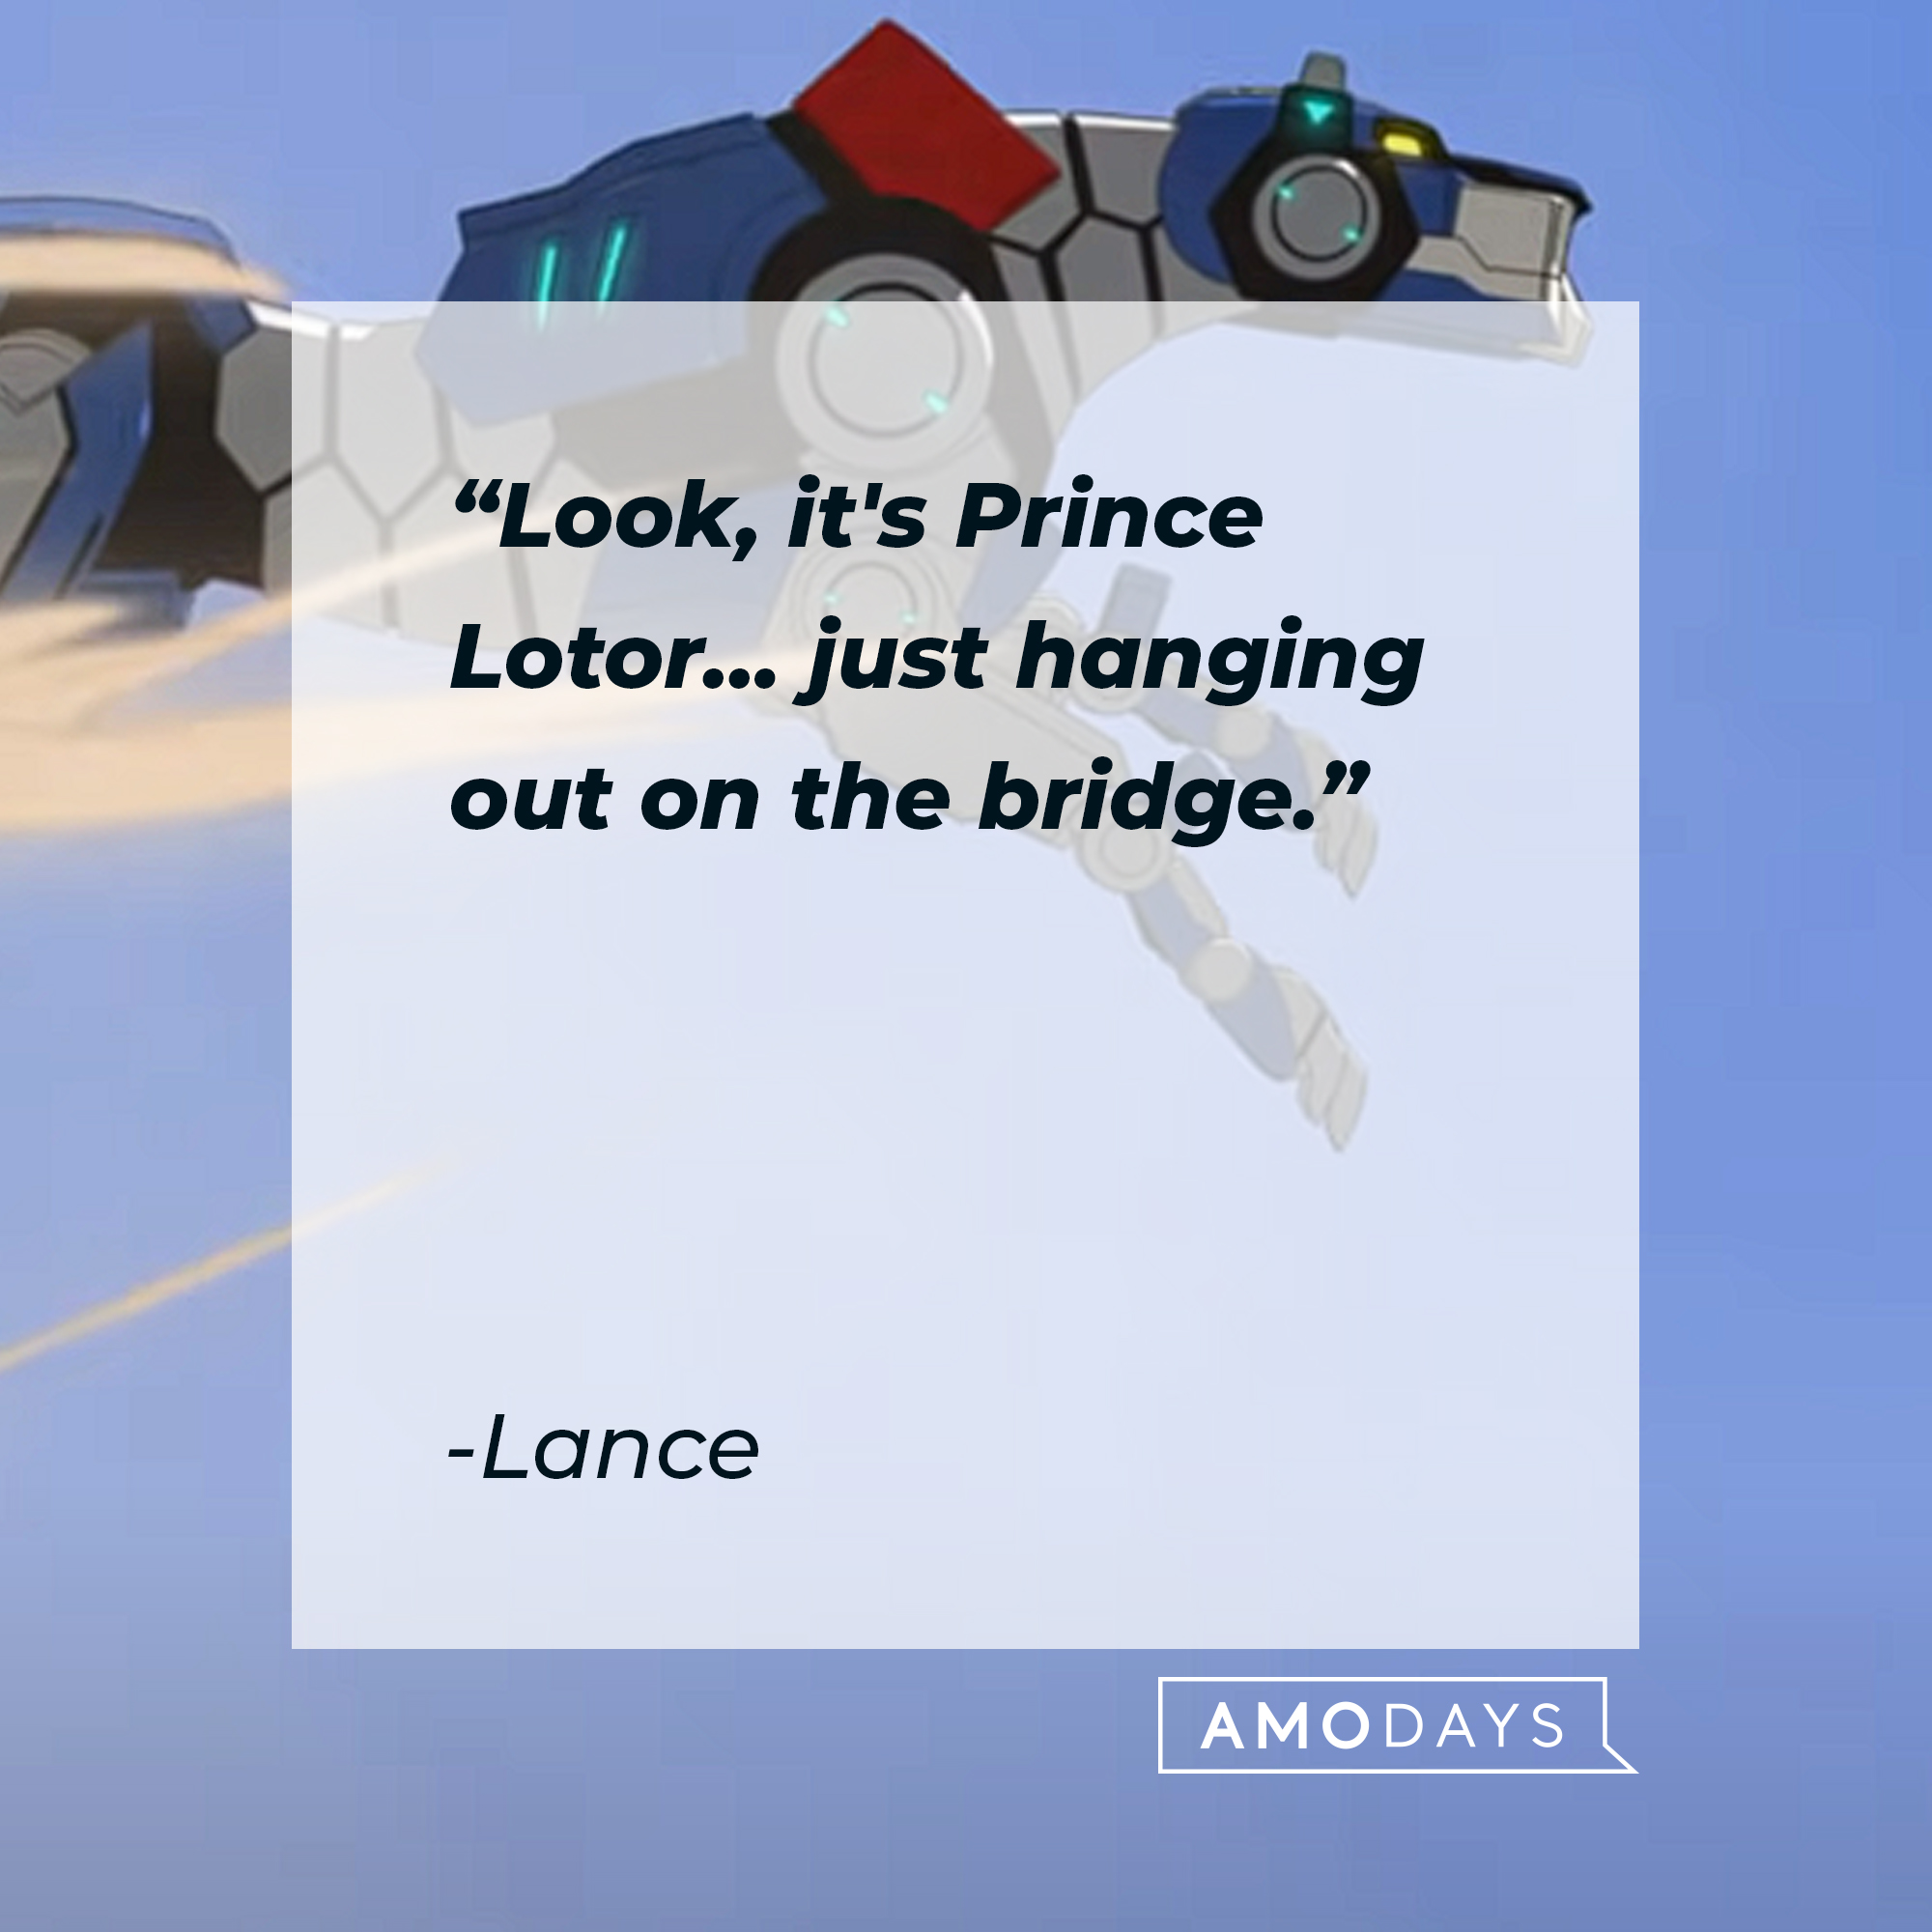 Lance's quote: "Look, it's Prince Lotor… just hanging out on the bridge." | Source: youtube.com/netflixafterschool